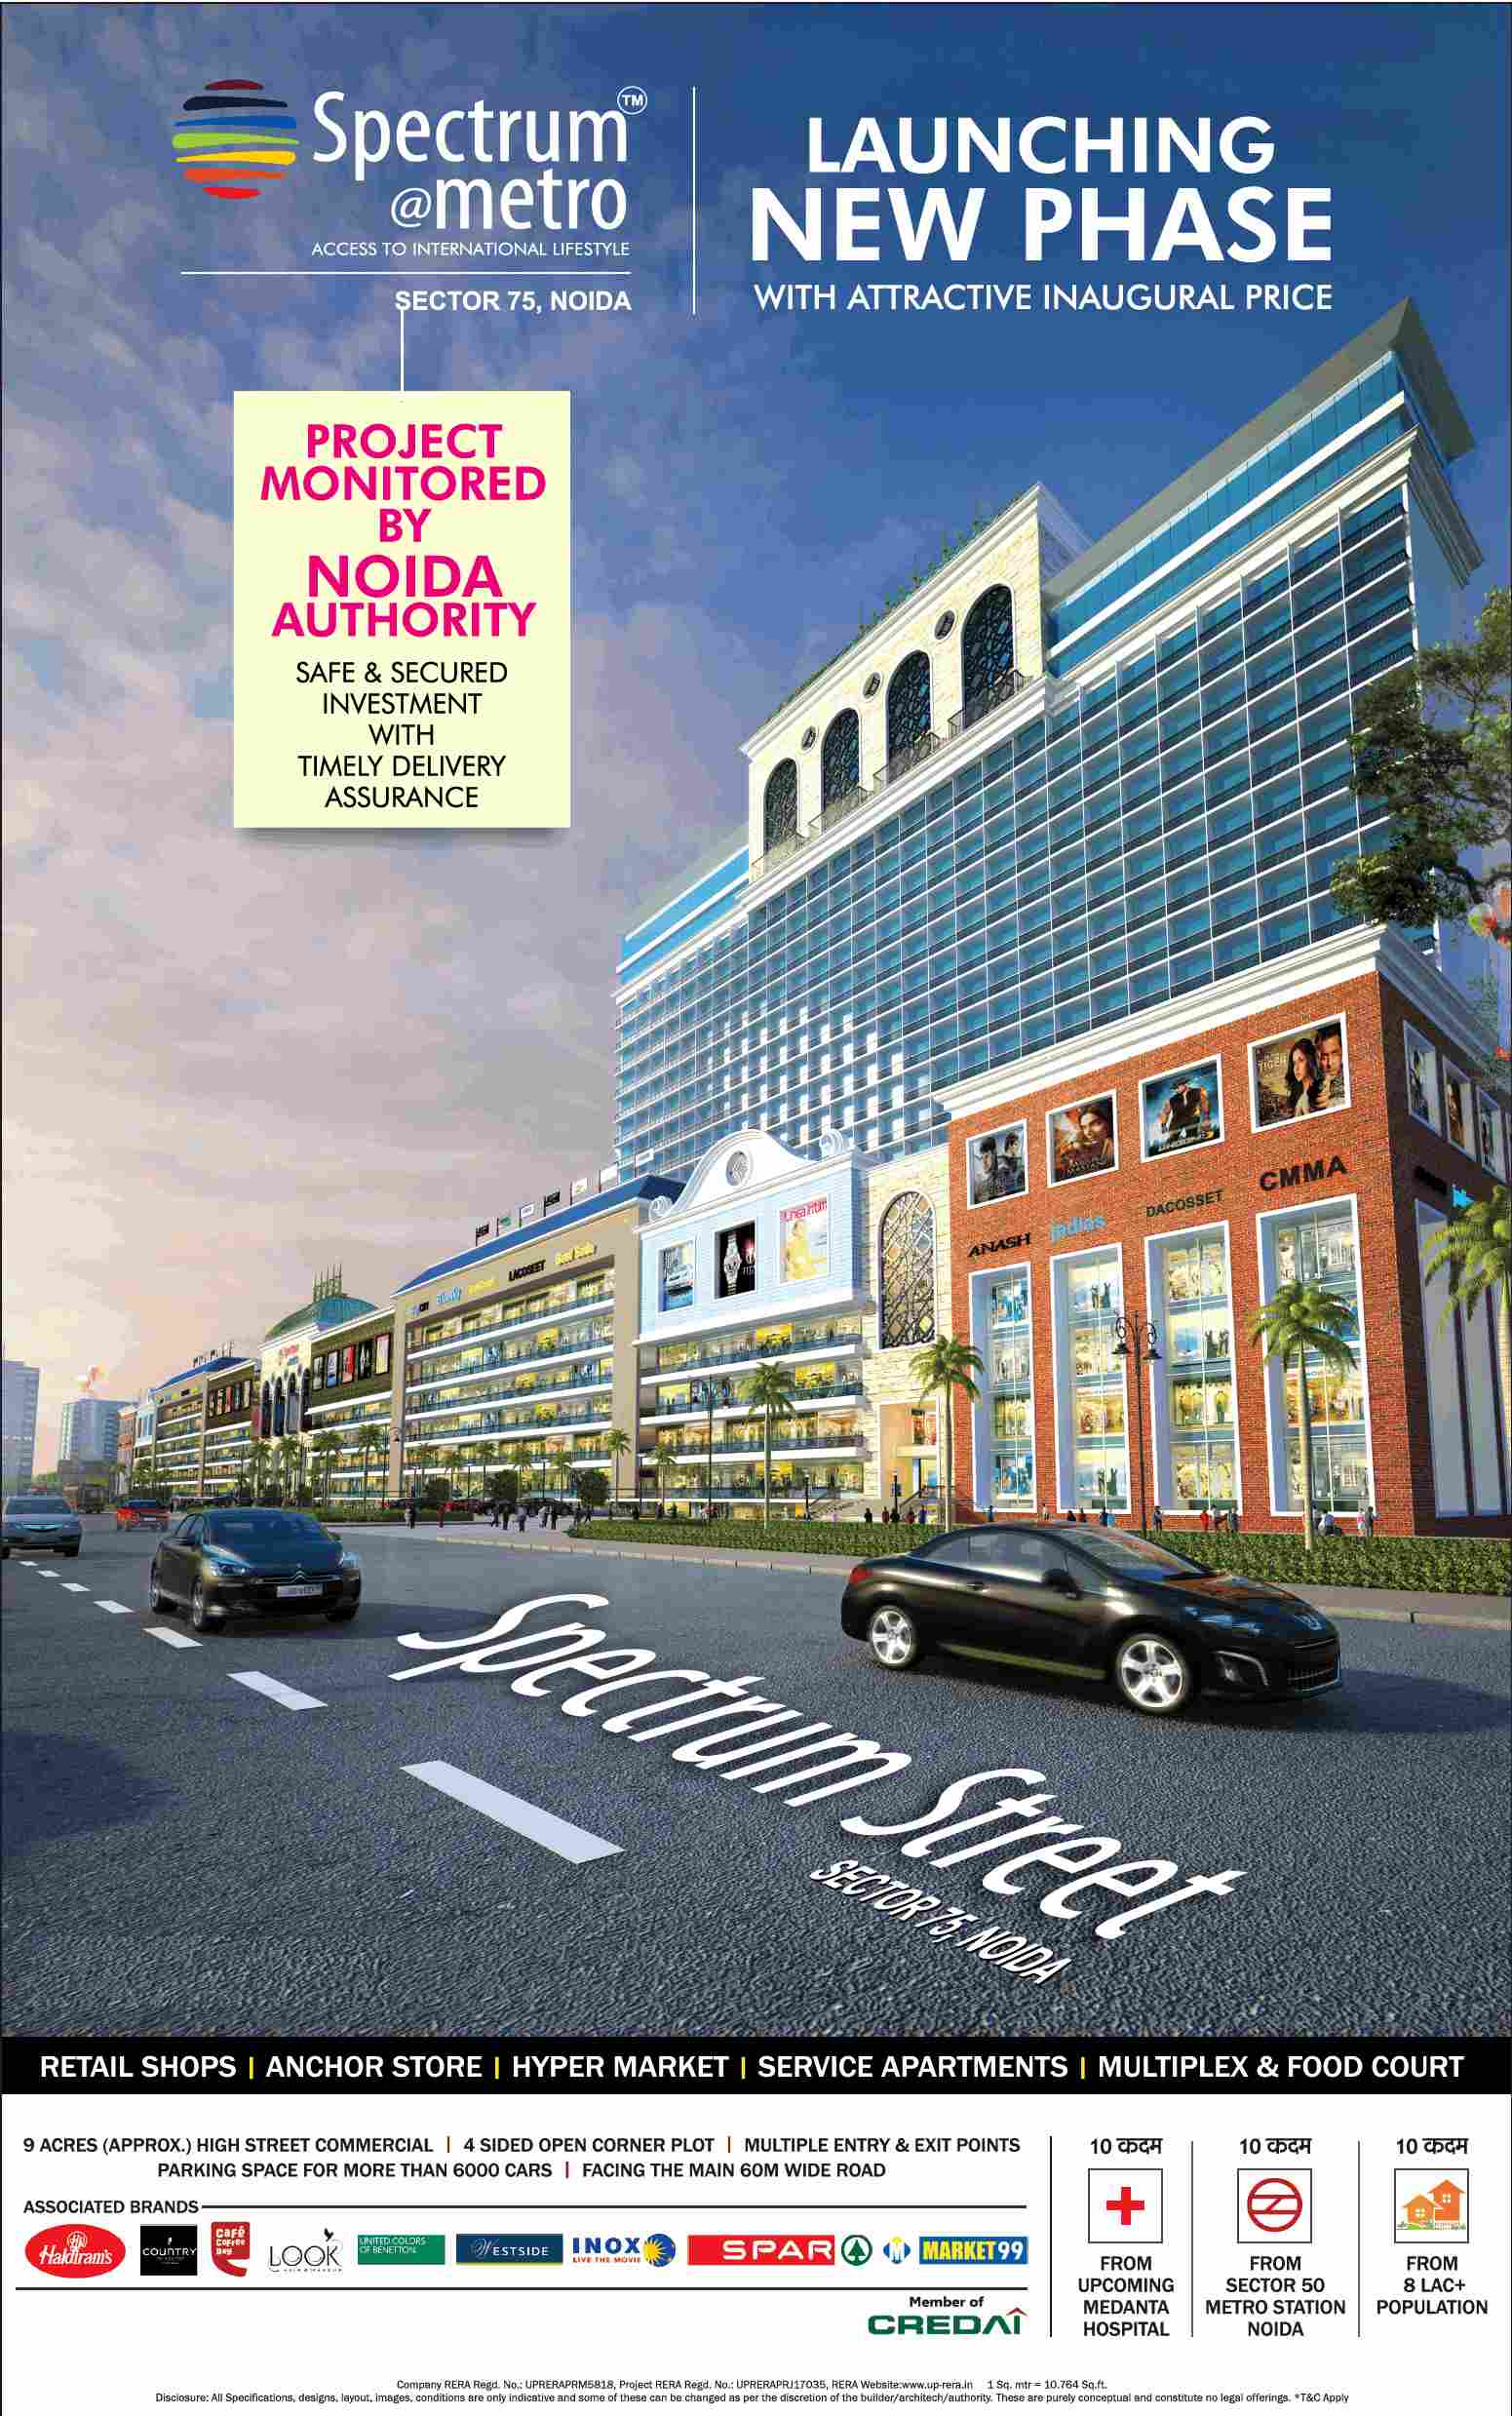 Launching new phase with attractive inaugural price at Blue Spectrum Metro in Noida Update